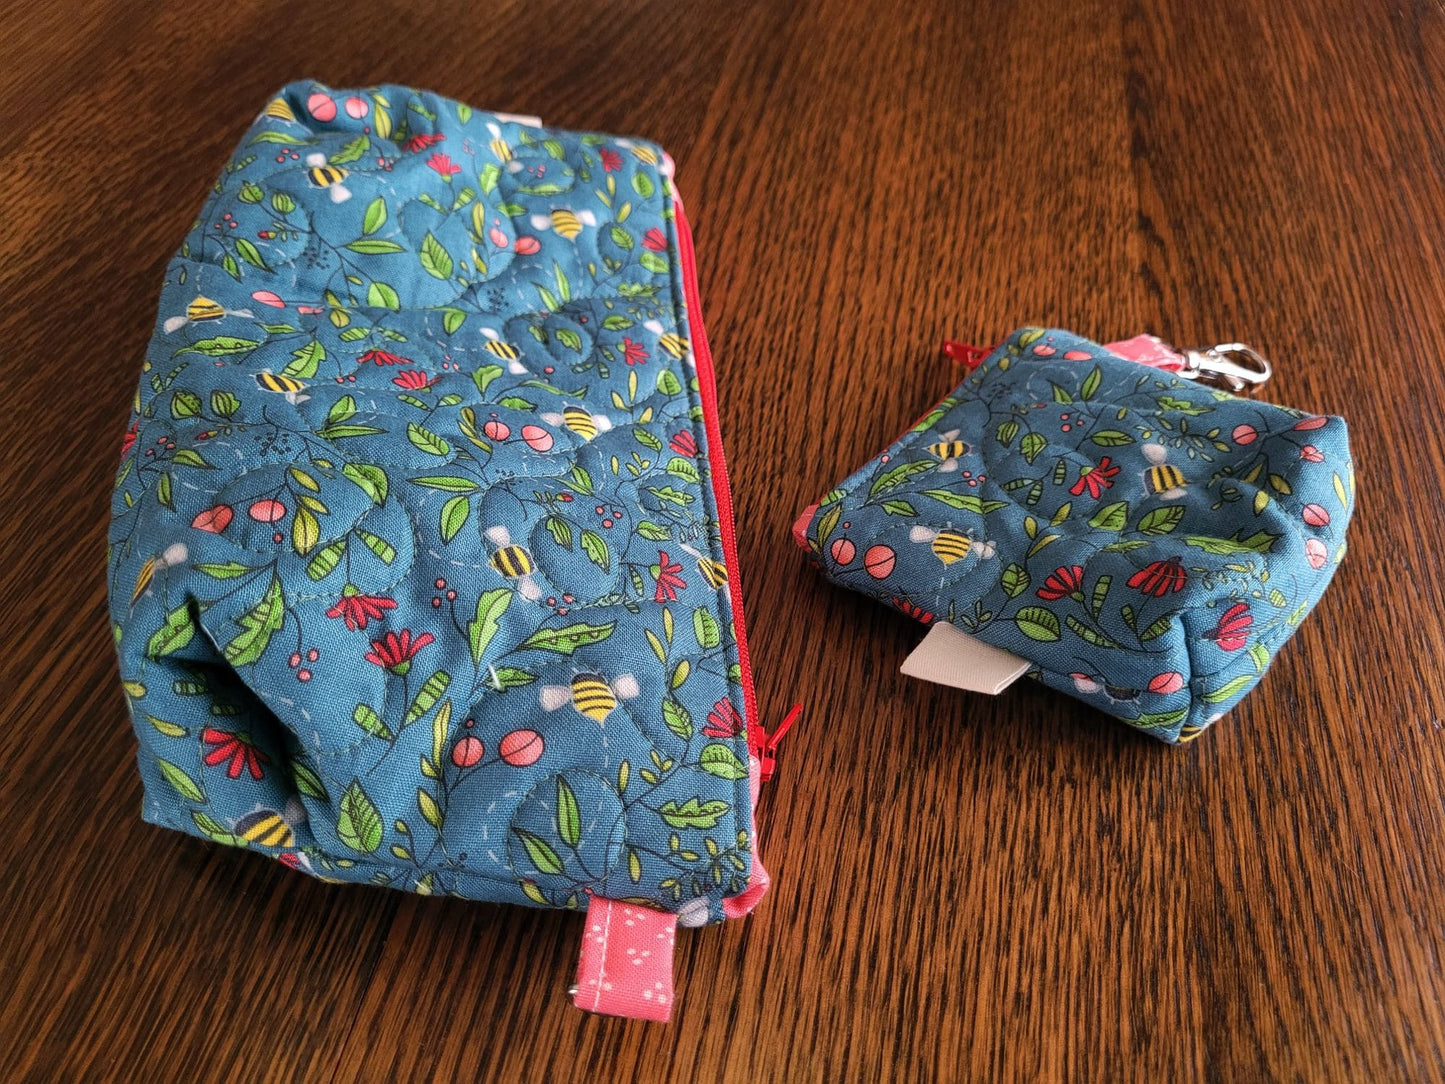 Quilted Cosmetic Bag Set | Novelty Boho Zipper Pouch | Small Teal Green Bee Stash Bag